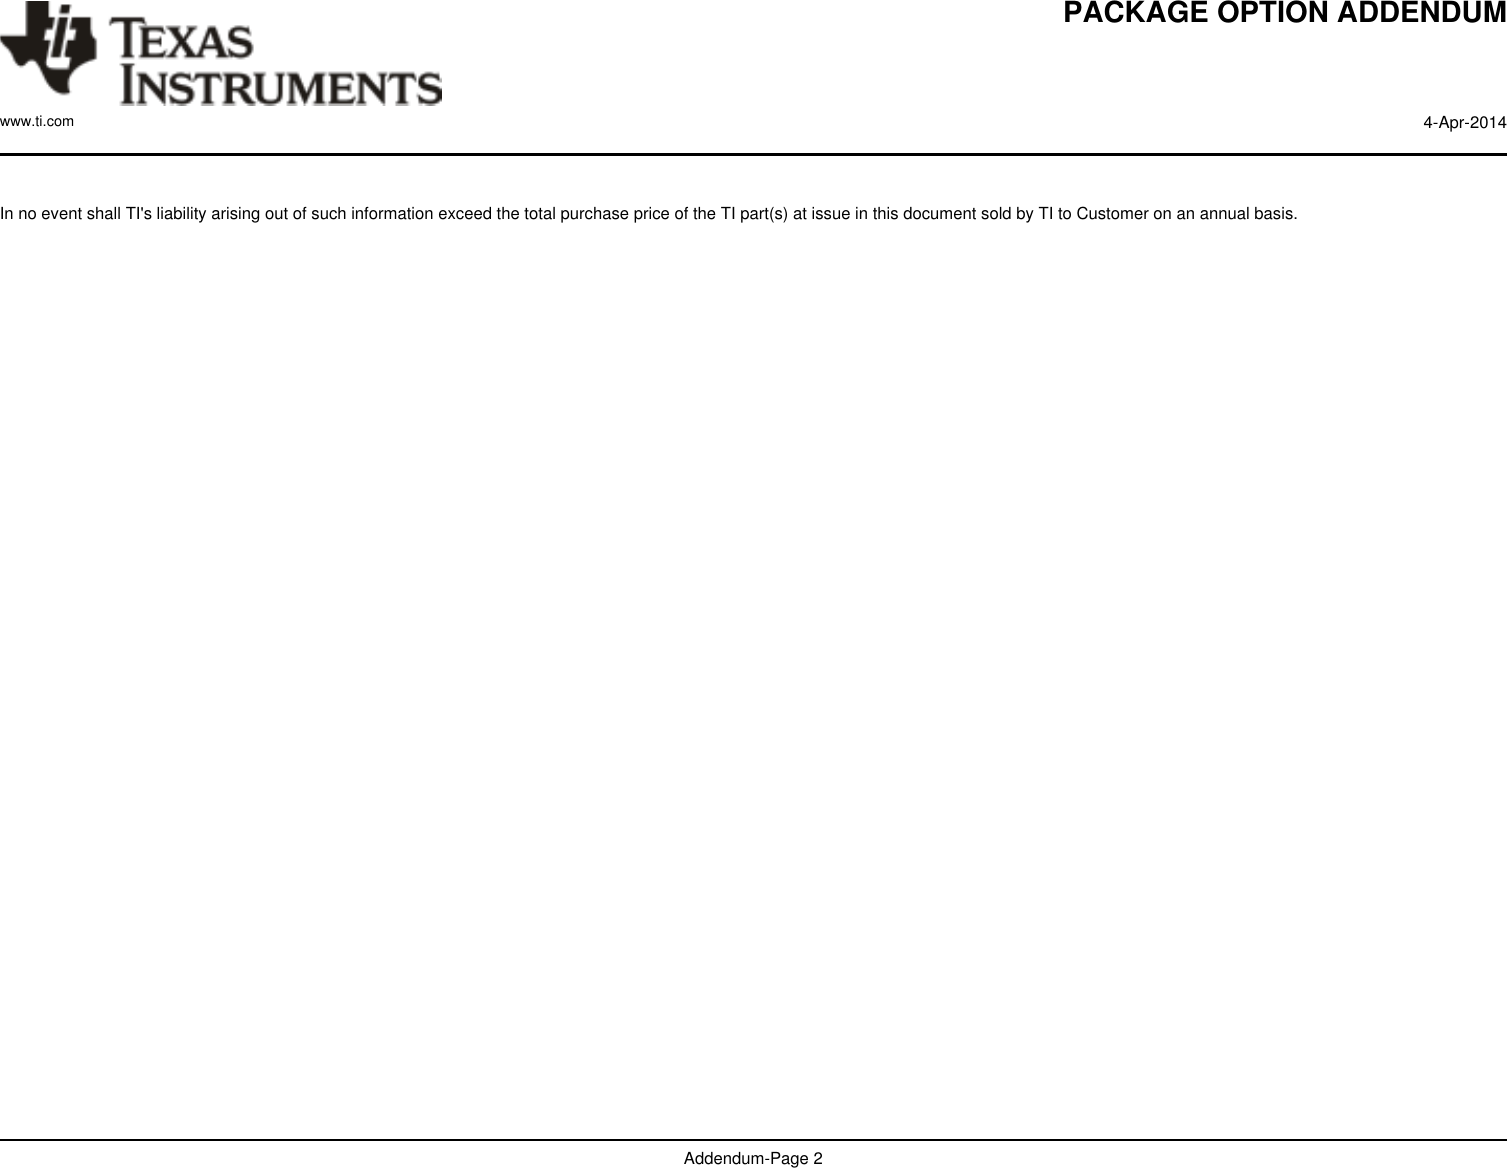 PACKAGE OPTION ADDENDUMwww.ti.com 4-Apr-2014Addendum-Page 2 In no event shall TI&apos;s liability arising out of such information exceed the total purchase price of the TI part(s) at issue in this document sold by TI to Customer on an annual basis. 